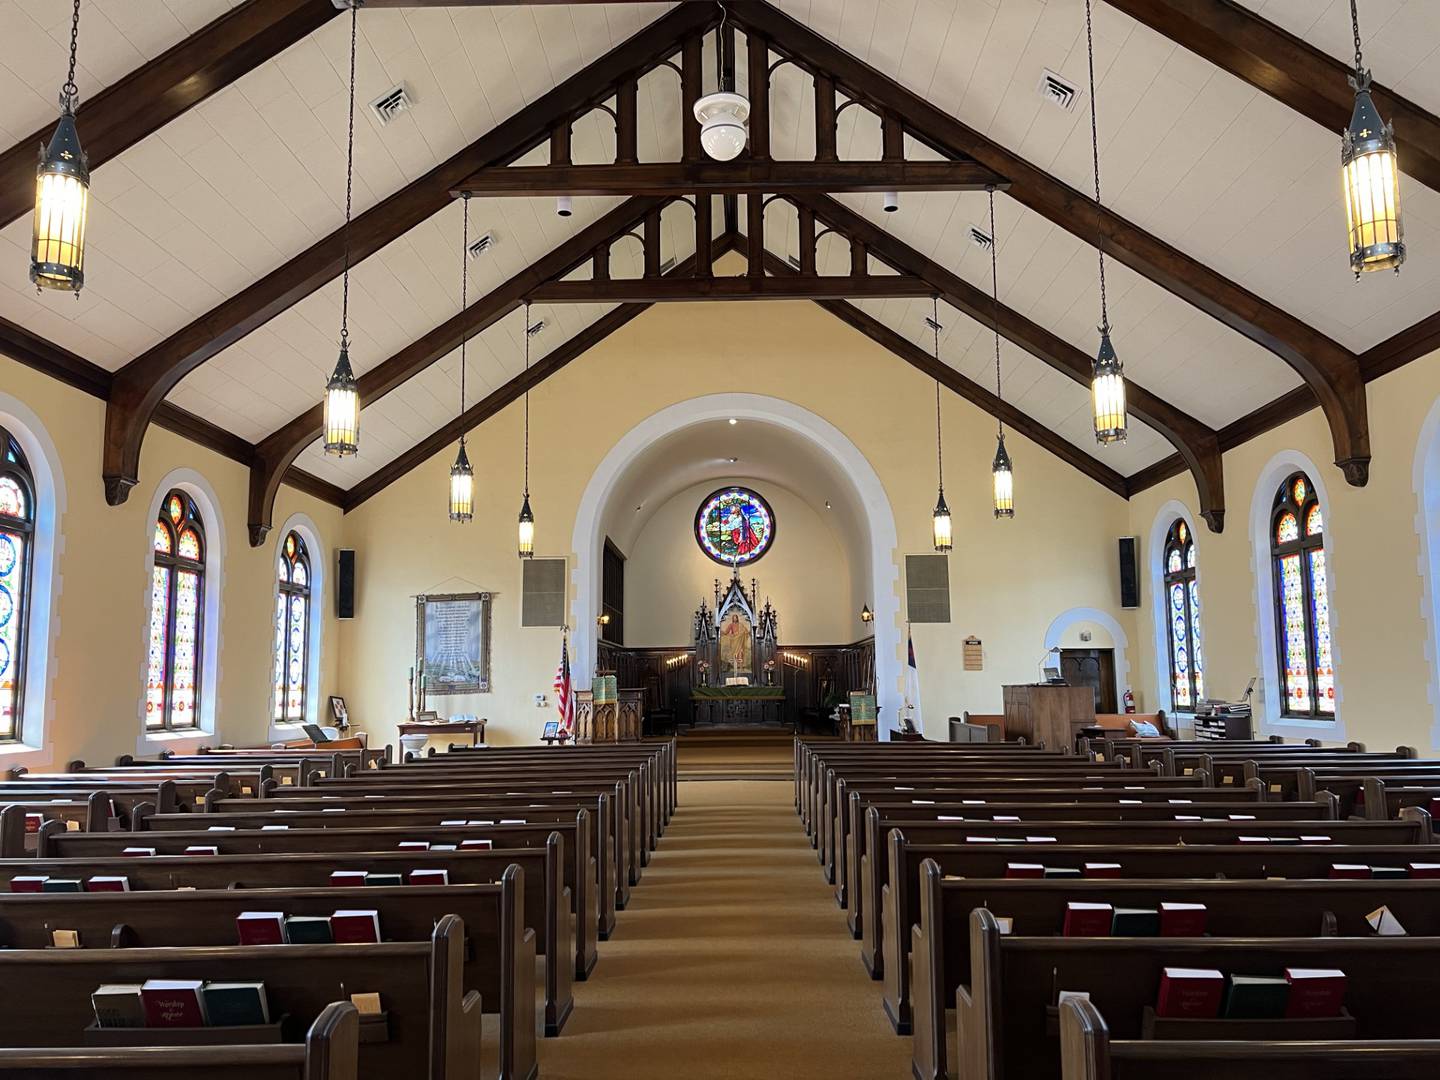 Trinity United Church of Christ, 829 Fourth St., La Salle will be celebrating its 150th anniversary with a worship service Sunday, June 11. Here is a look at the interior of the church.